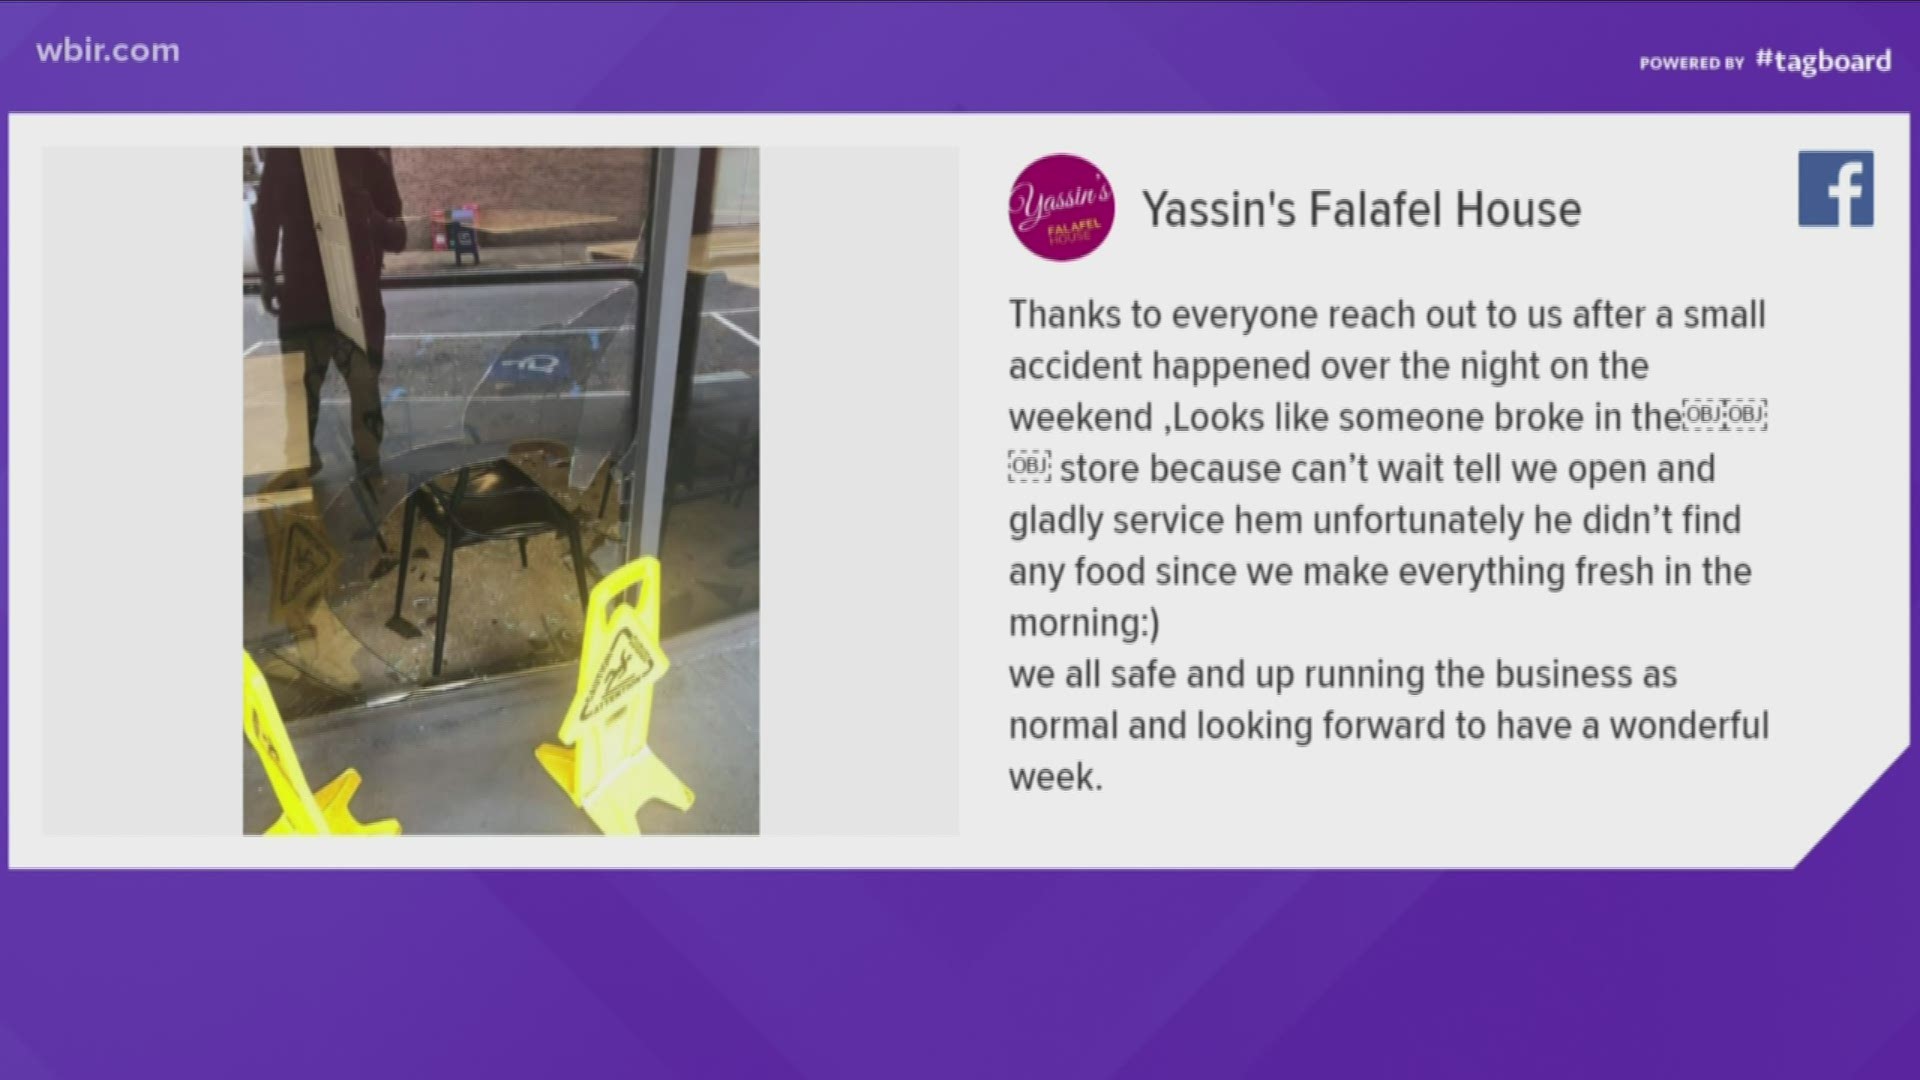 After a Sunday night break-in, Yassin's Falafel House said business is as usual -- and an investigation is underway.